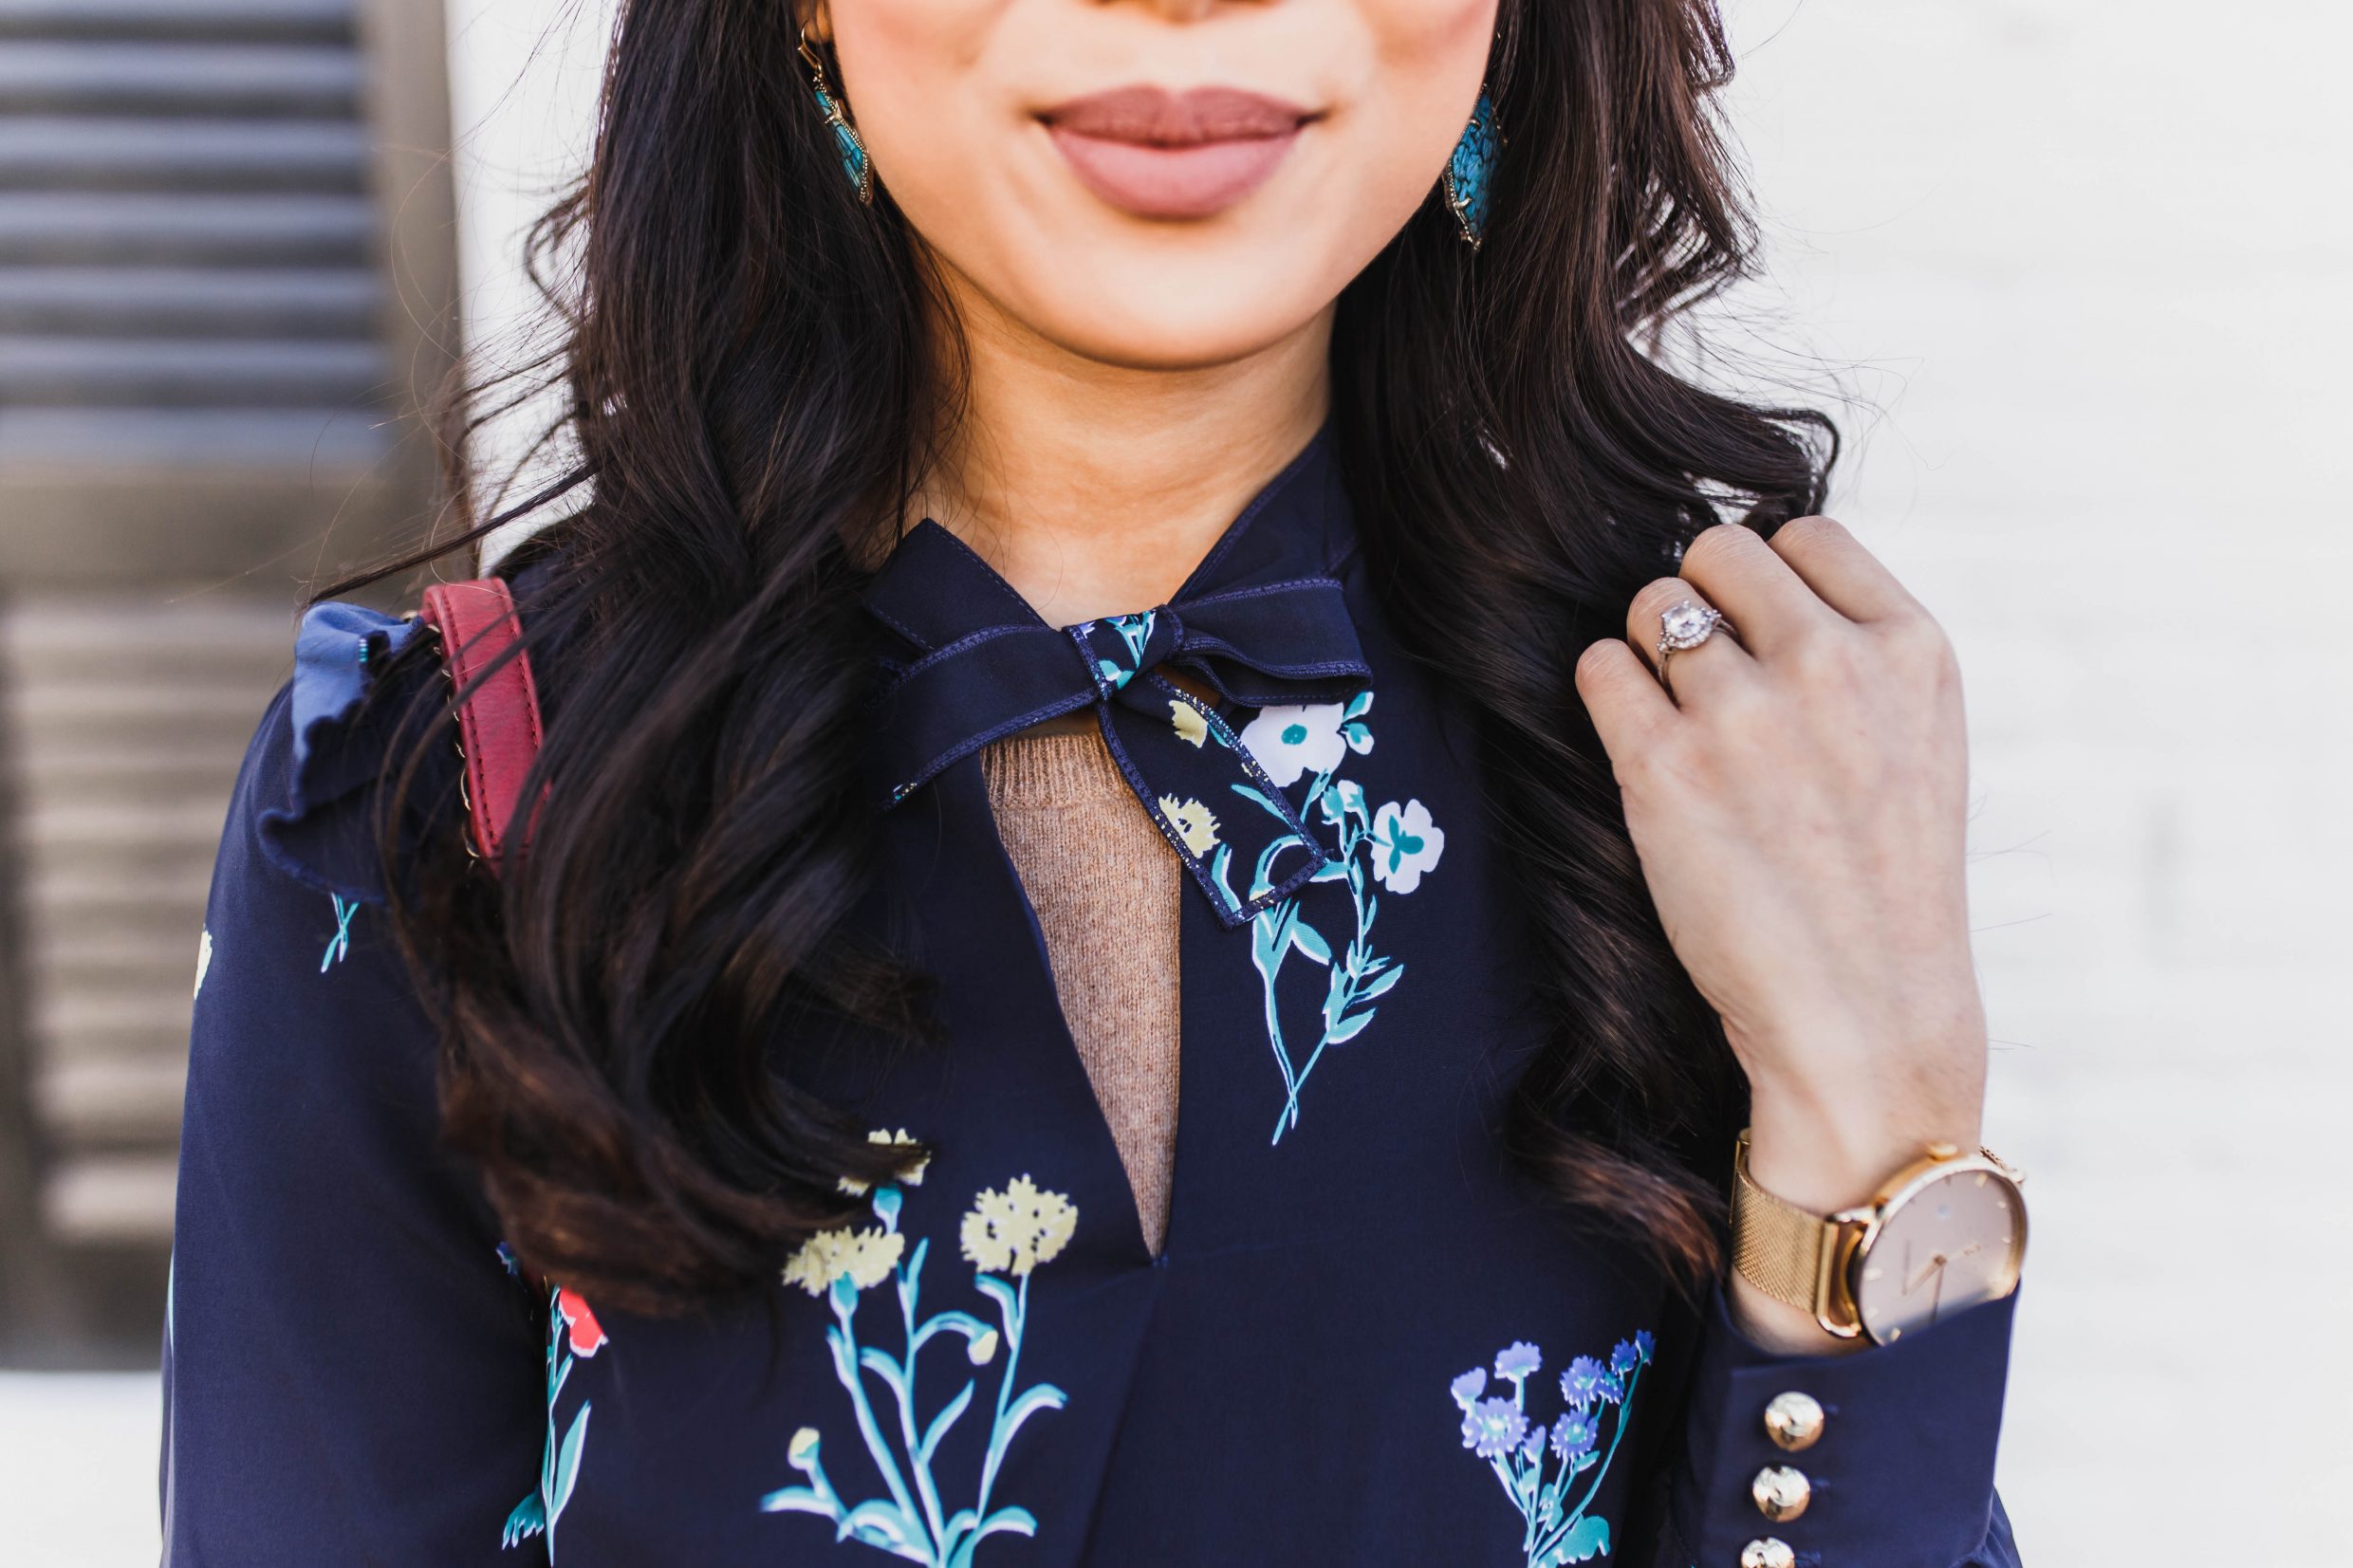 Blogger Hoang-Kim wears the Tisdale floral dress for Spring with a gold Paul Hewitt watch